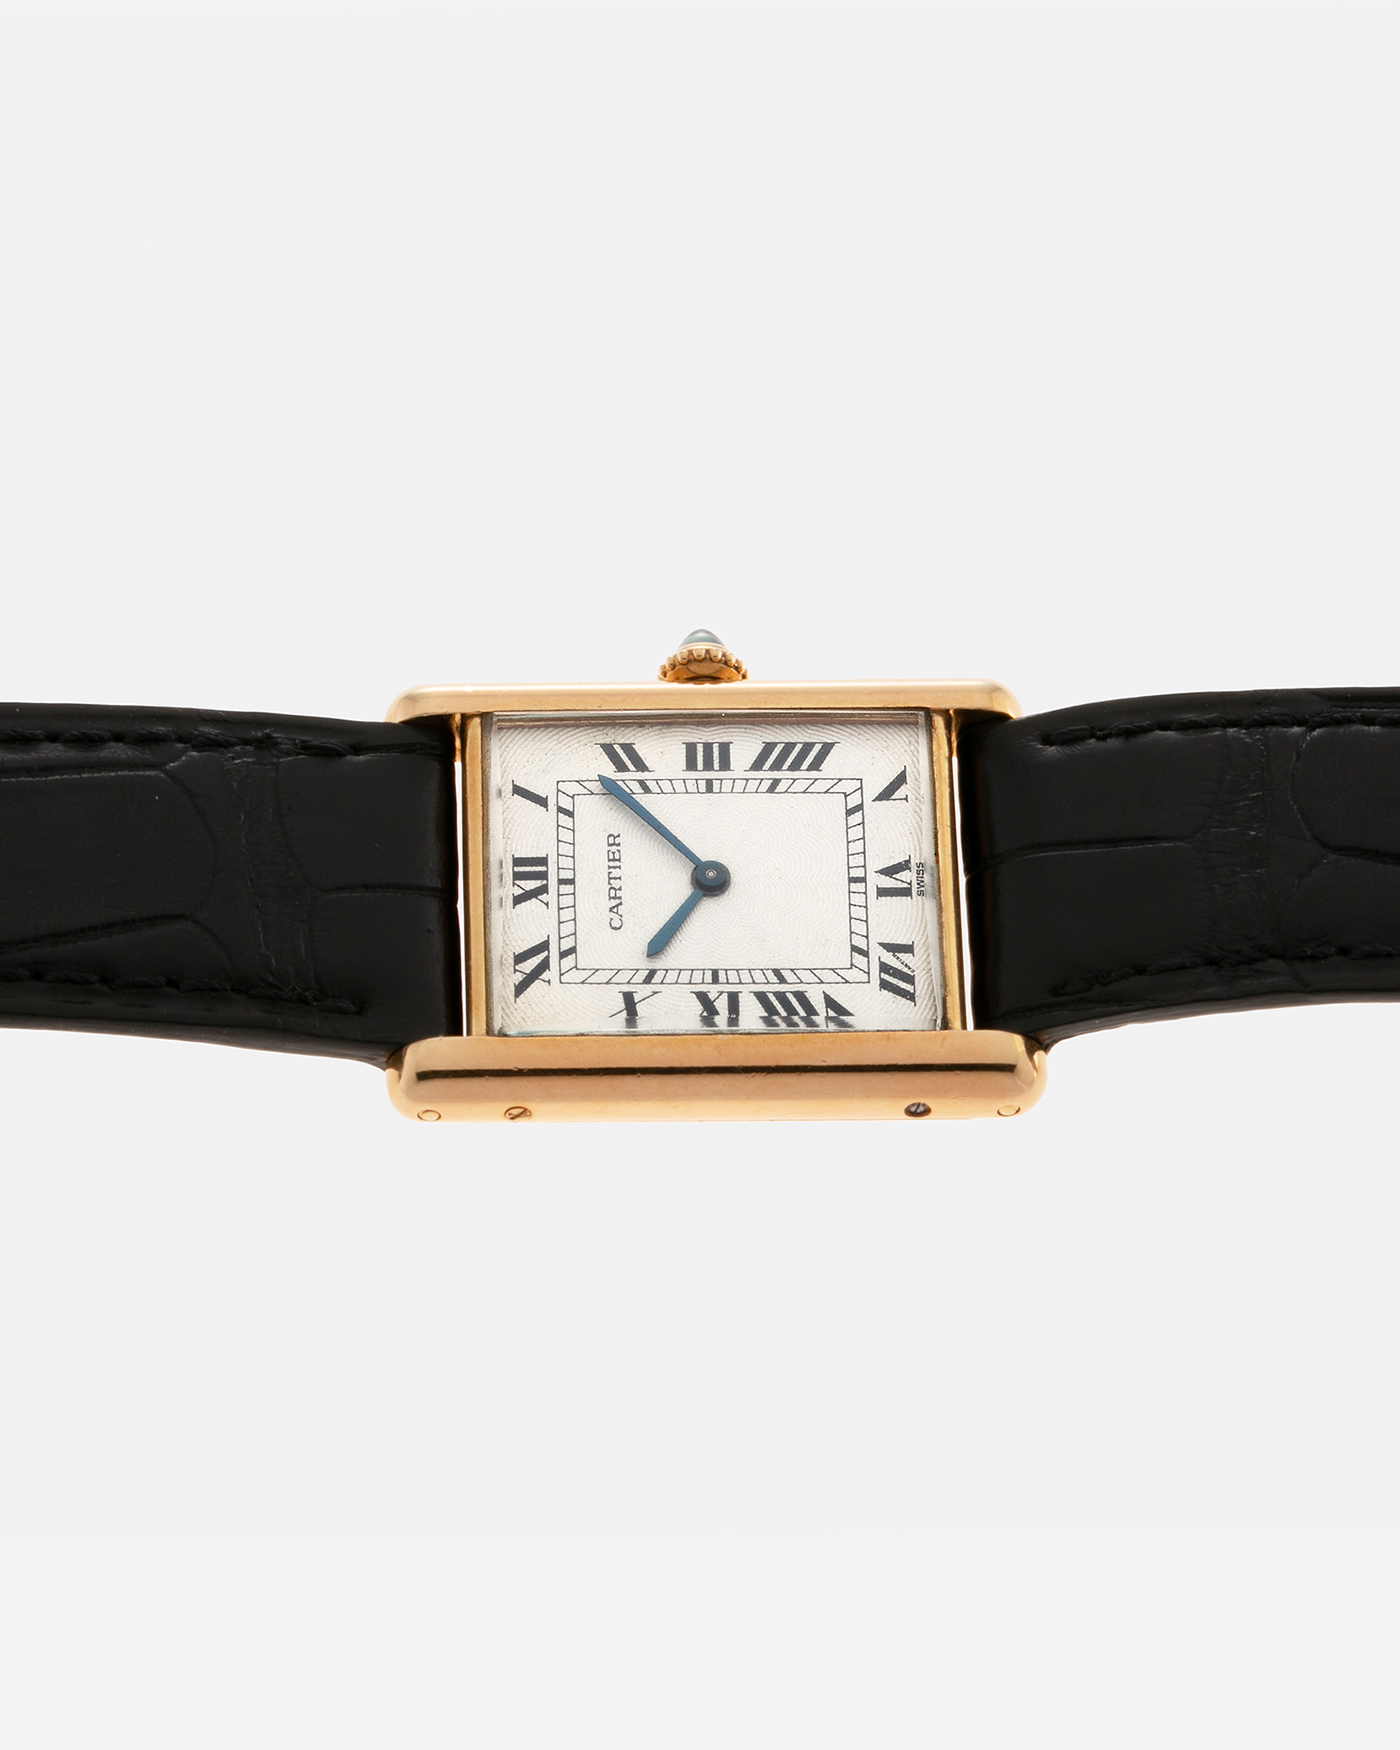 Brand: Cartier Year: 1980s Model: Tank Louis Cartier Reference Number: 96065 Material: 18-carat Yellow Gold Movement: Cartier Cal. 96 (Based on Piaget Cal. 21), Manual-Winding Case Diameter: 23mm x 30mm9 Lug Width: 17mm Strap: Cartier Alligator Leather Strap with Signed 18-carat Yellow Gold Tang Buckle